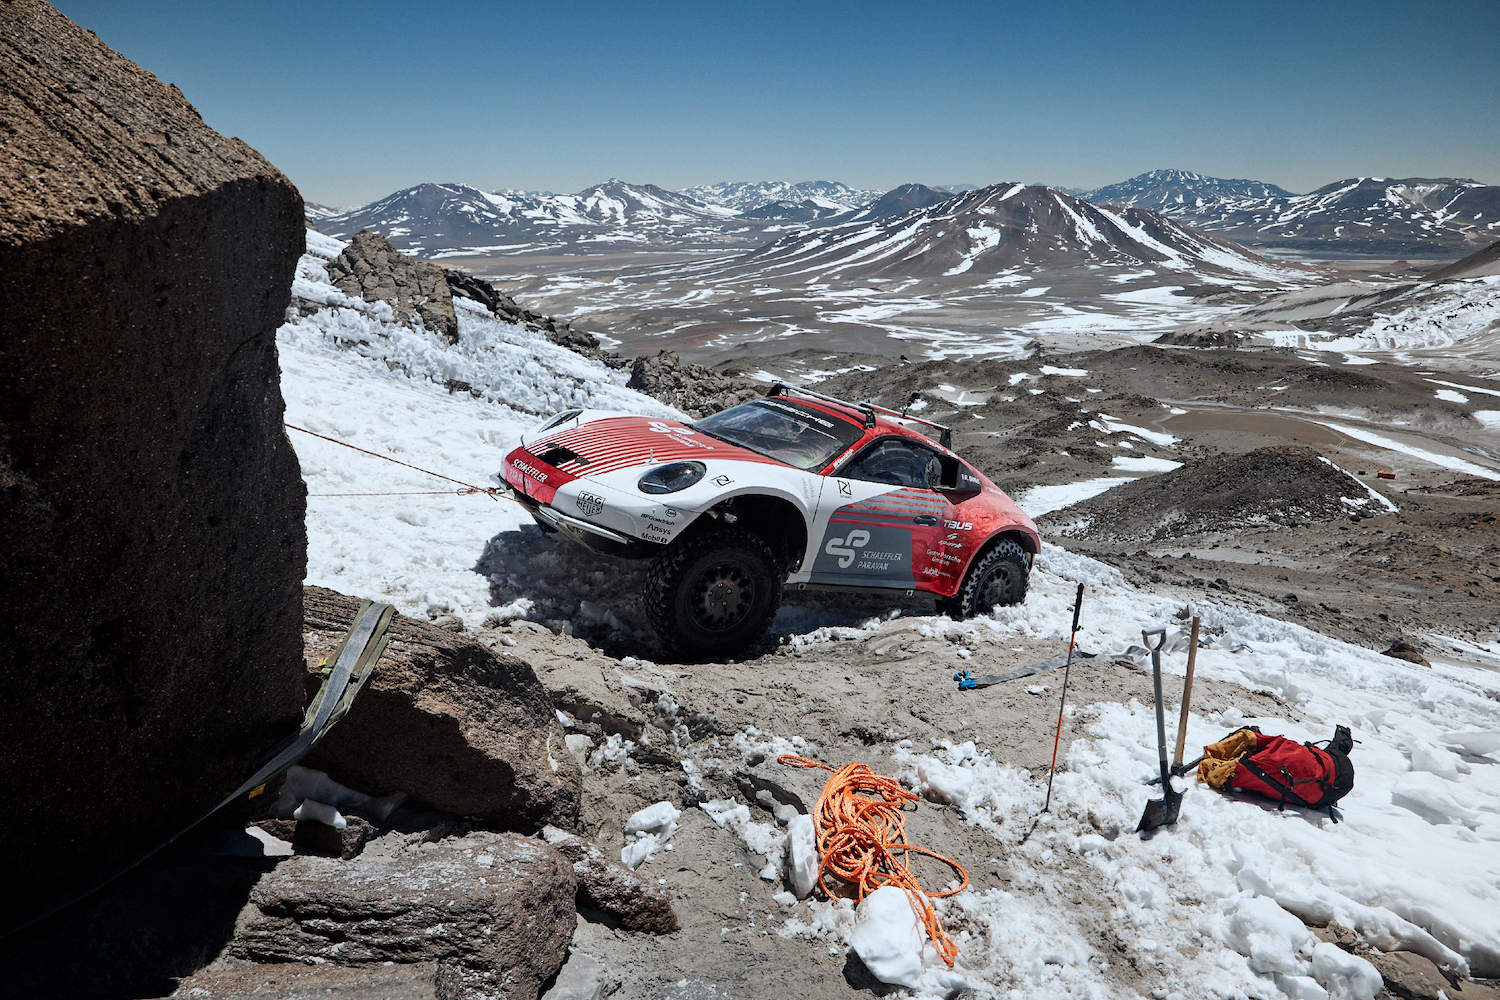 Porsche 911 Dakar Prototype climbing up a snowy volcano in Chile with mountains in the back.